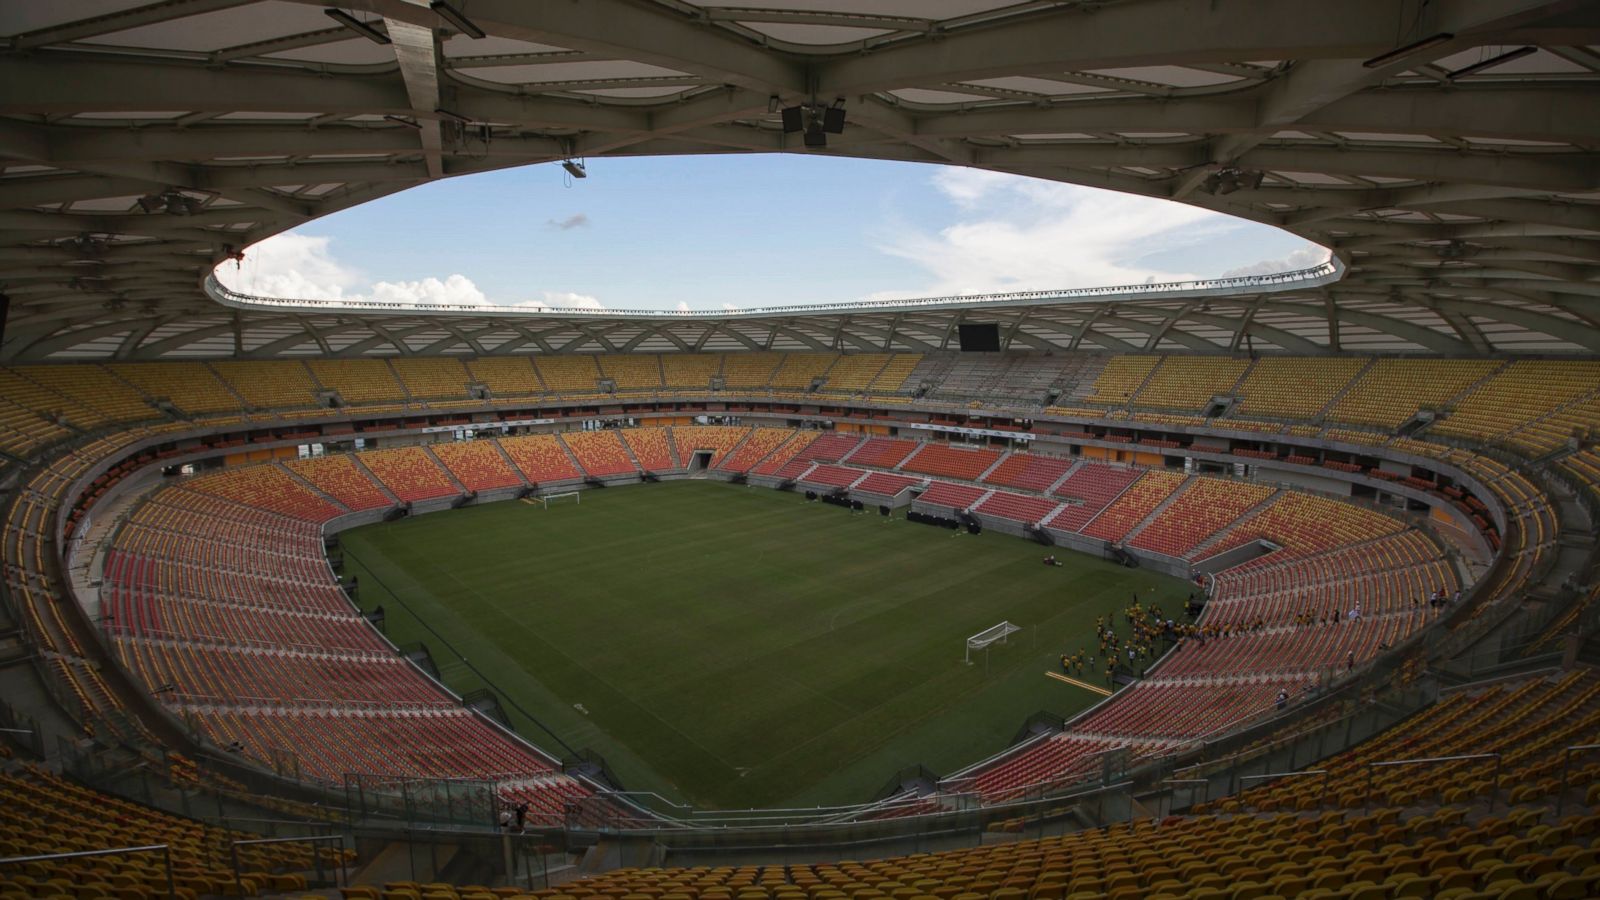 Brazil inaugurates another World Cup stadium